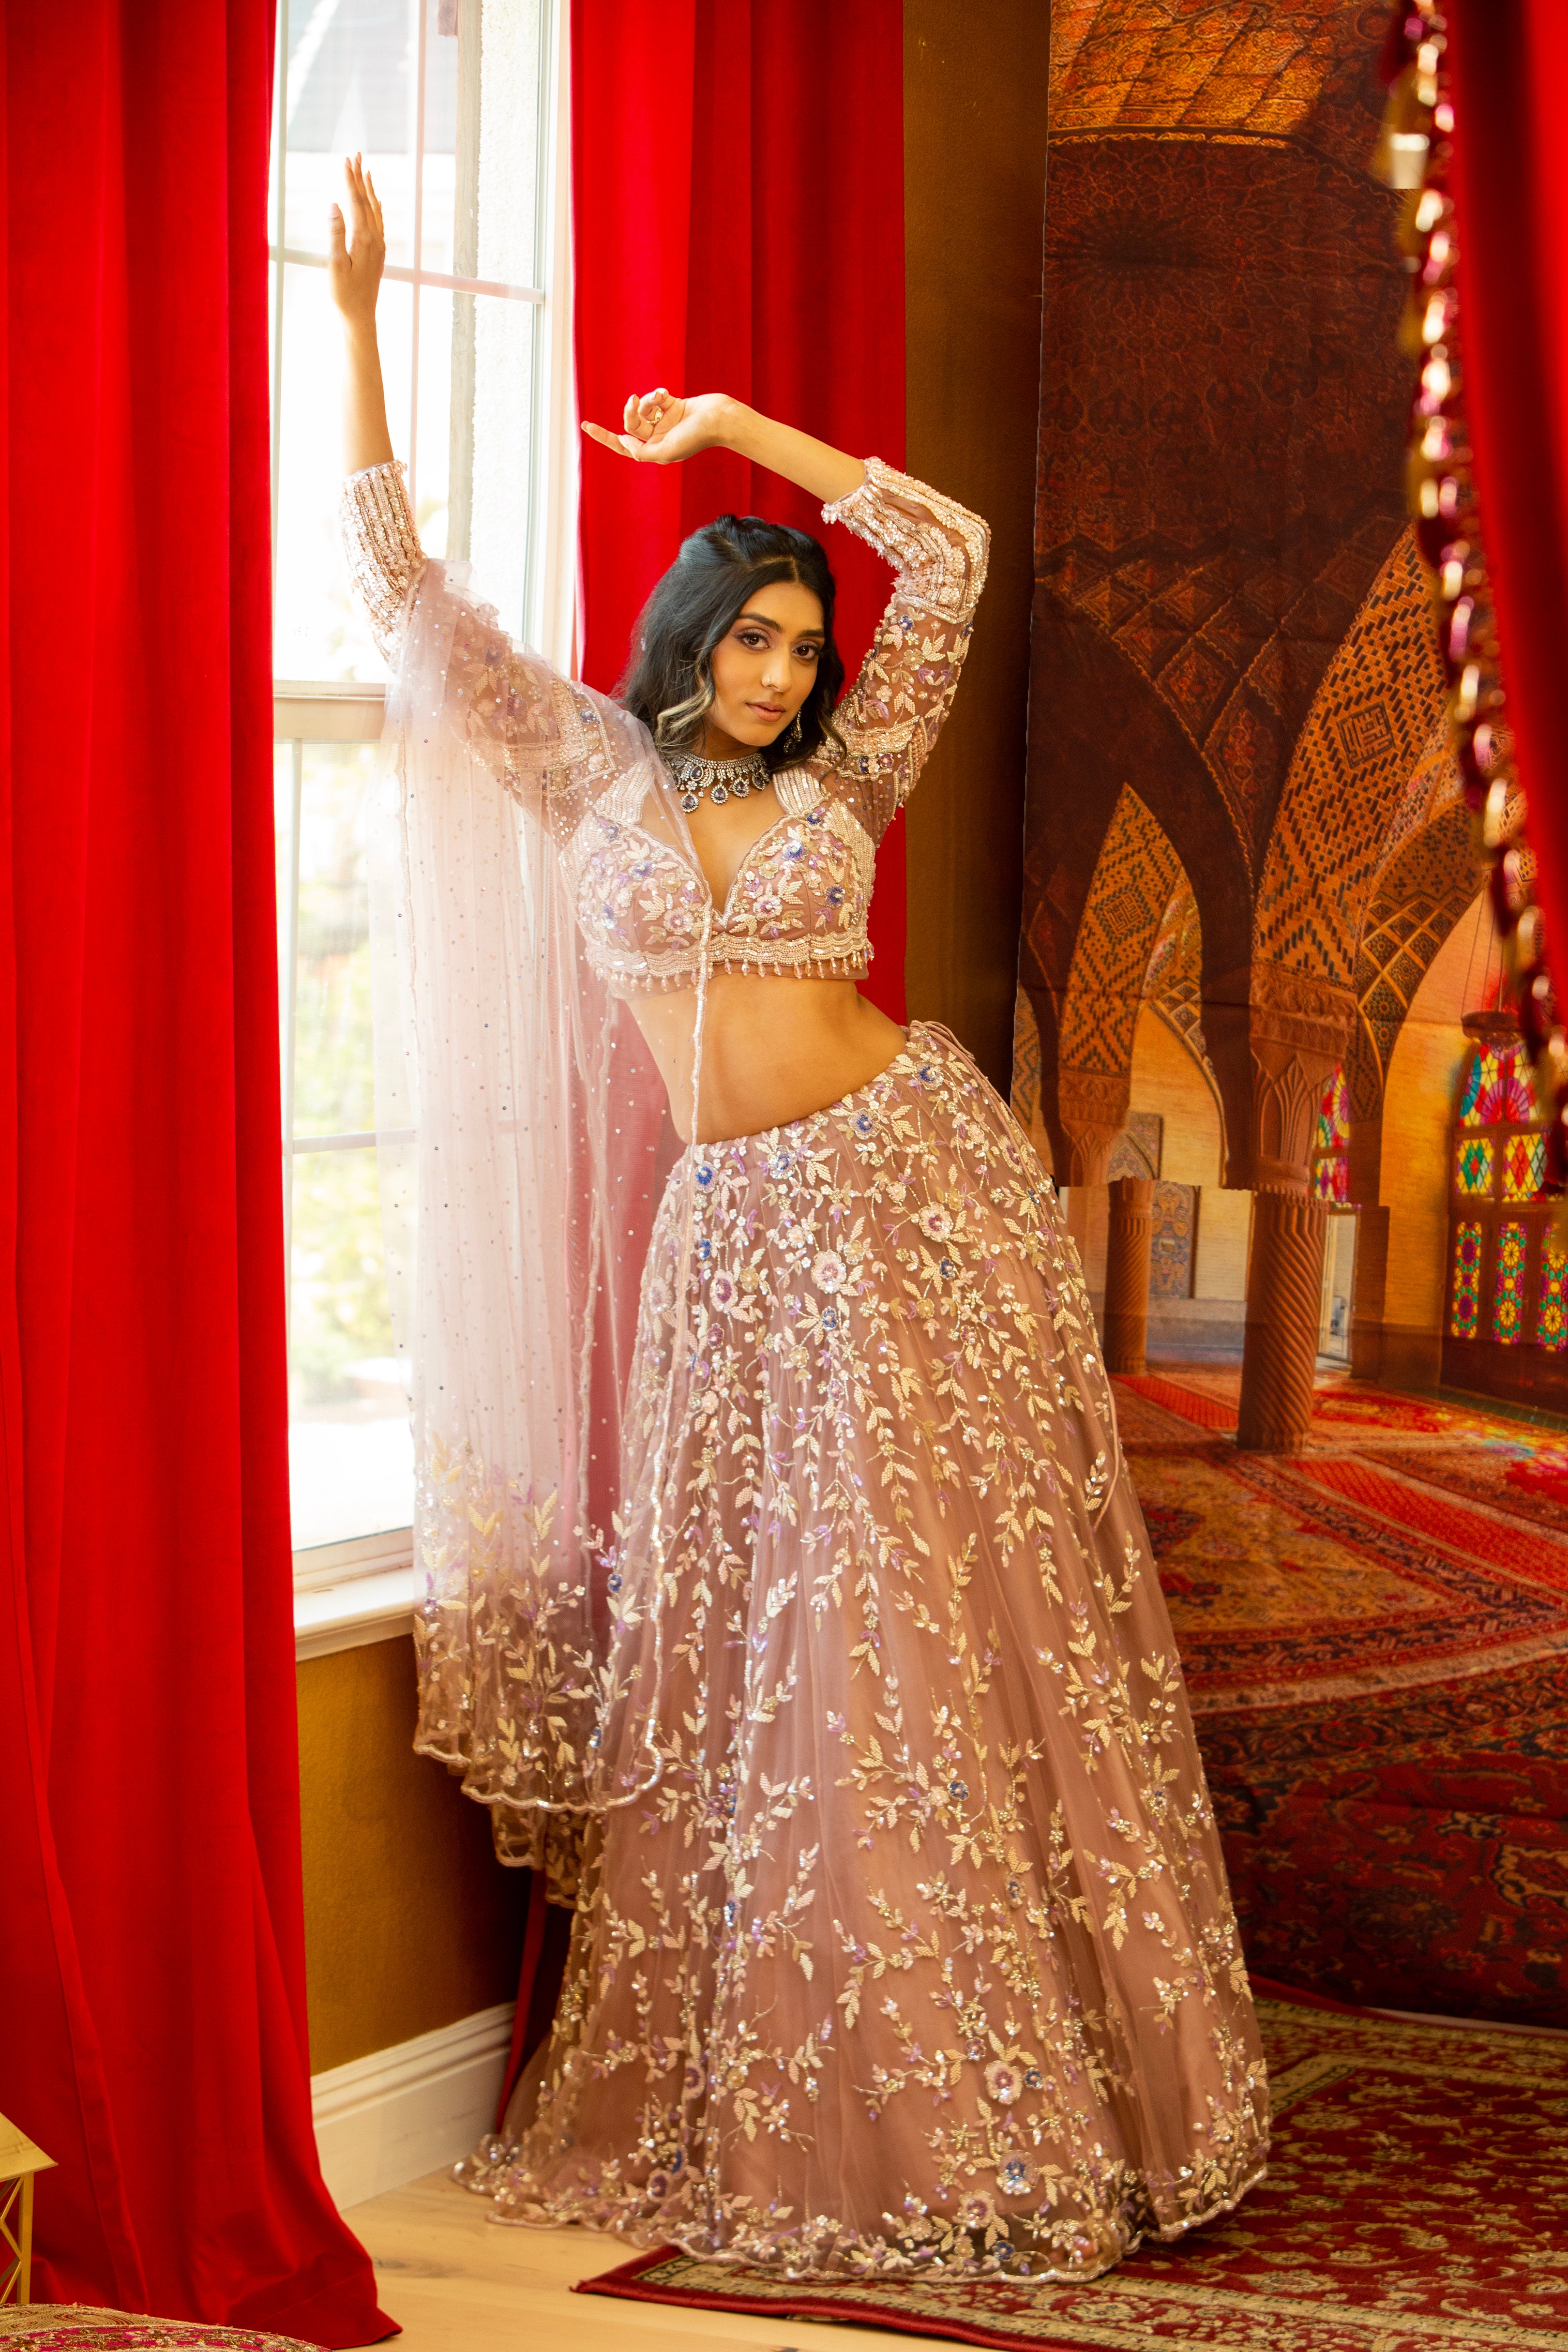 5 Tips to Look Slimmer in your Bridal Lehenga | Indian Fashion Mantra